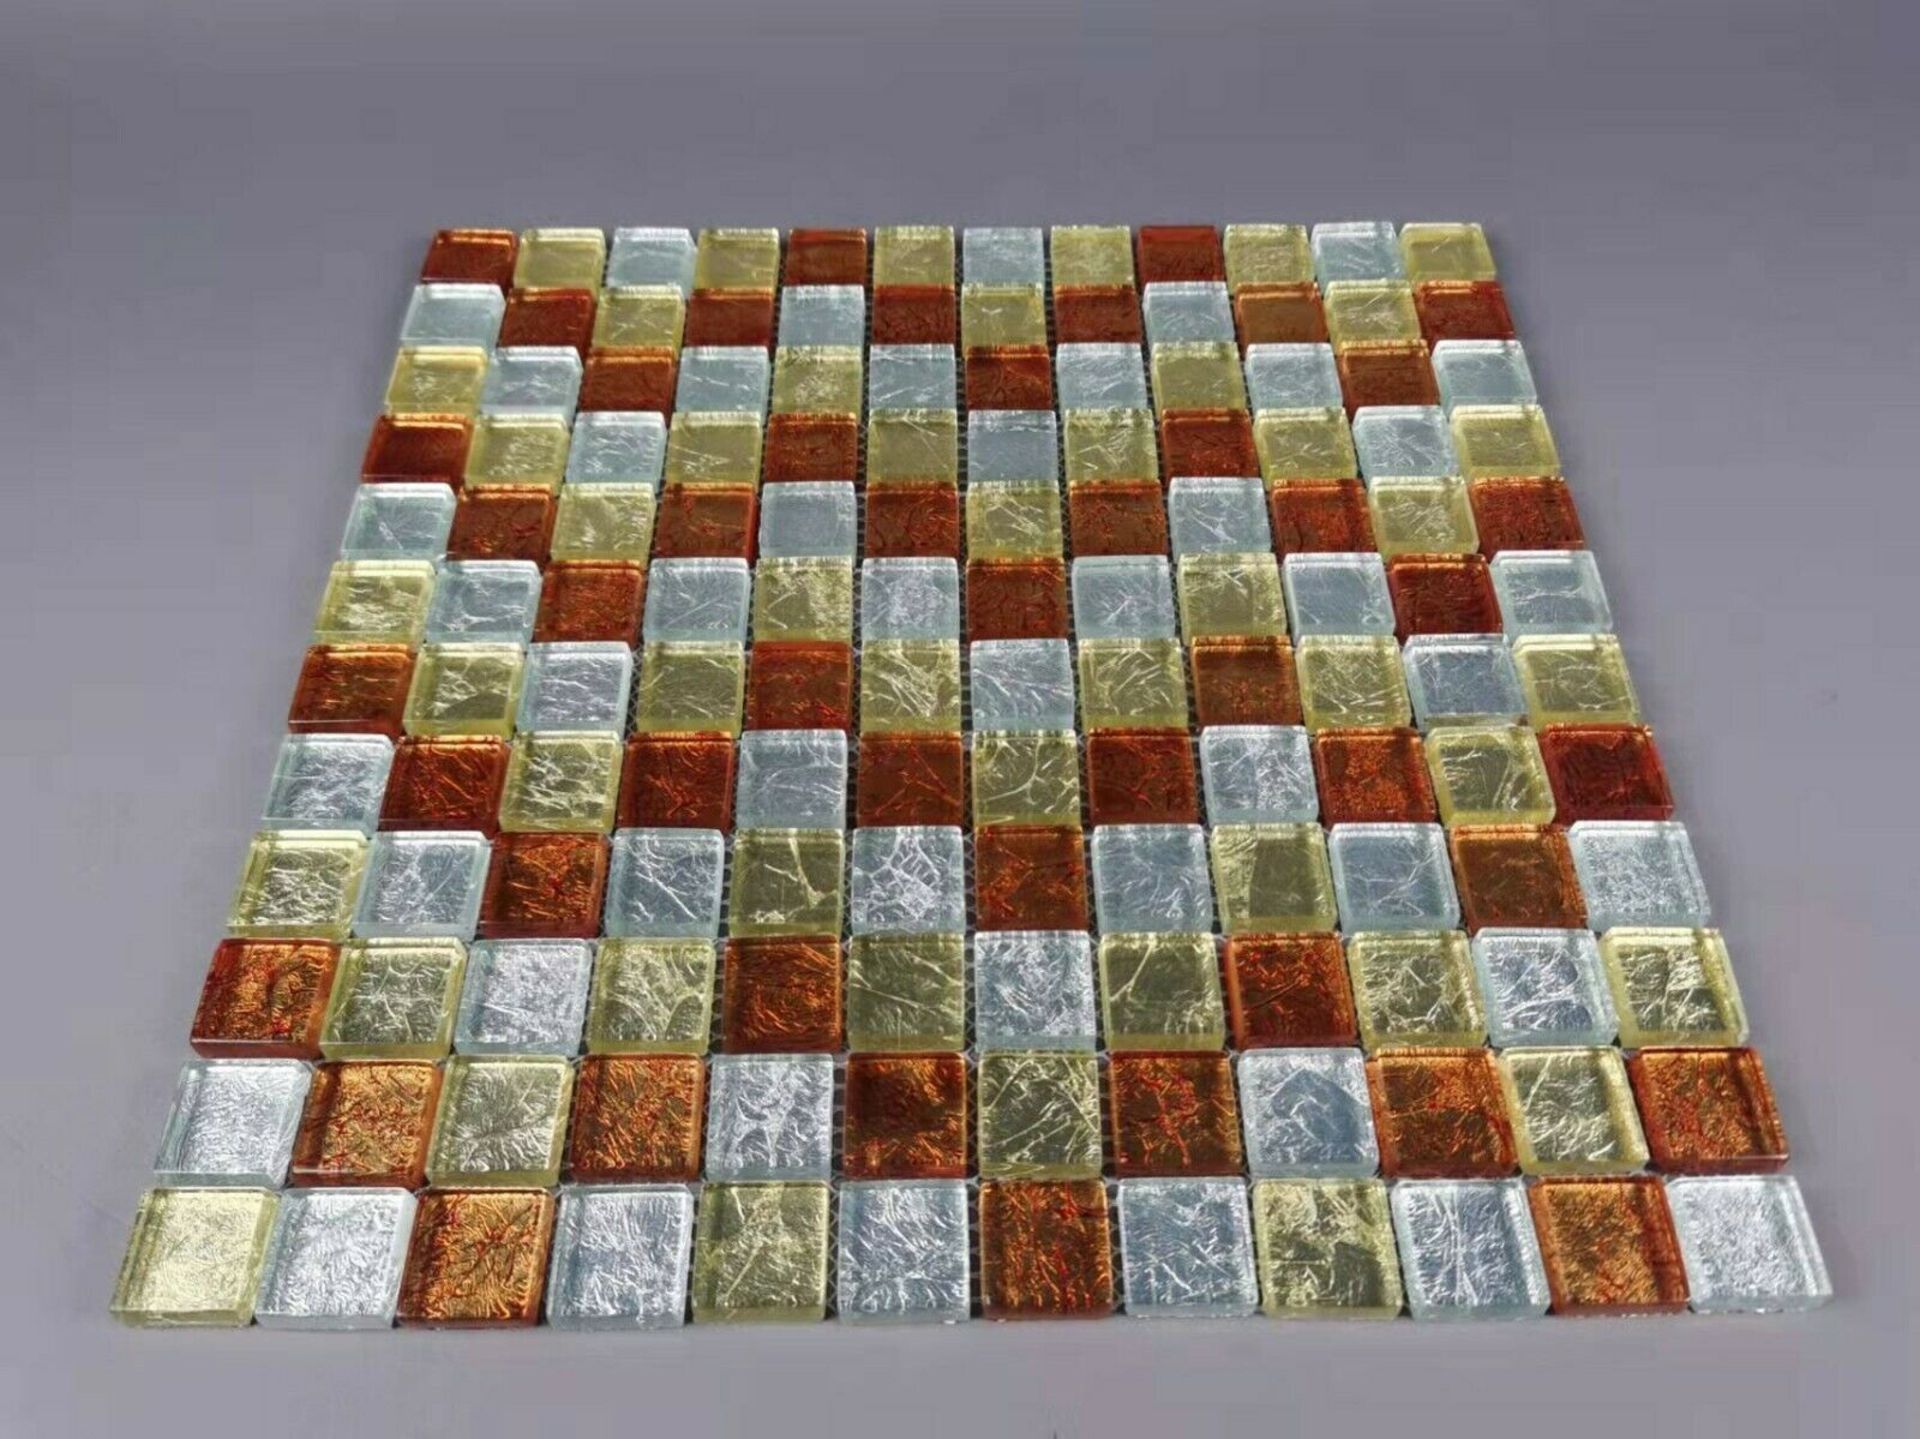 Stock Clearance High Quality Glass/Stainless Steel Mosaic Tiles - 11 Sheets - One Square Metre - Image 4 of 4